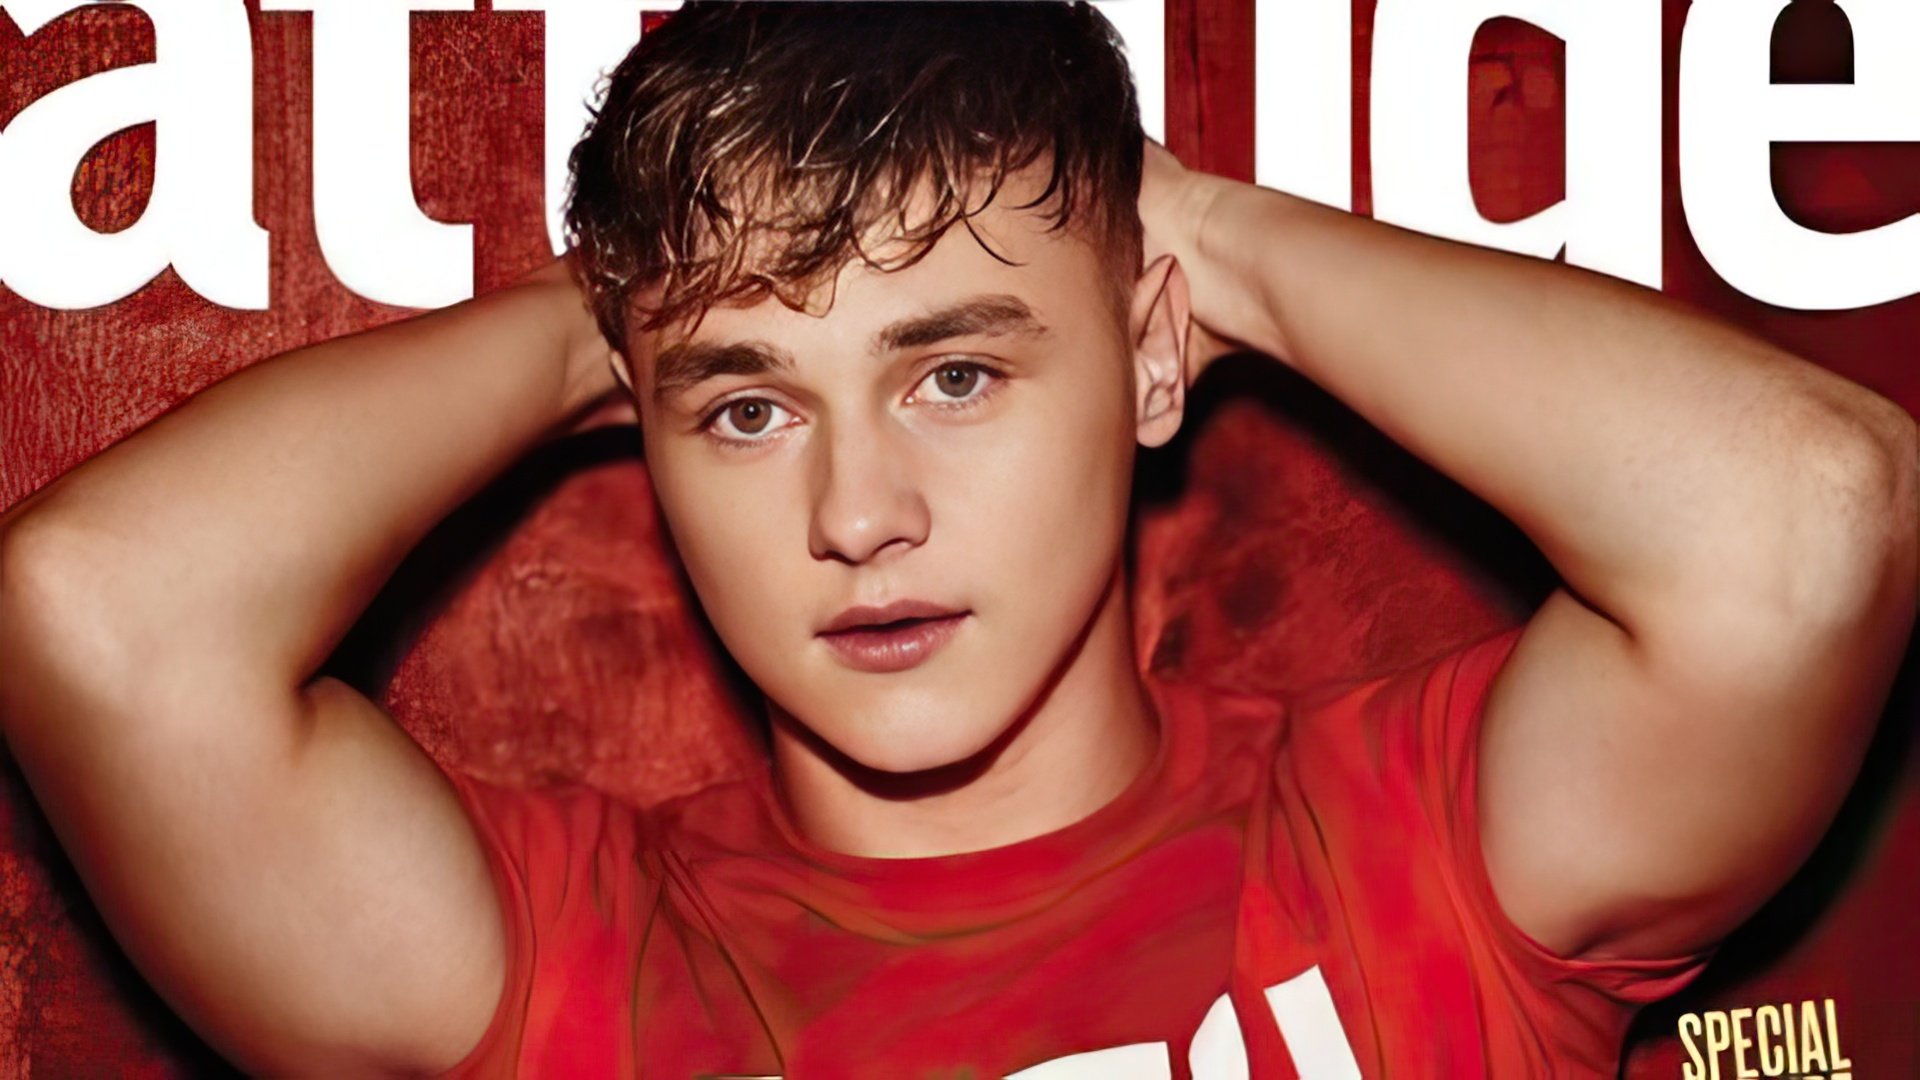 In 2012, Ben Hardy landed his first serious role